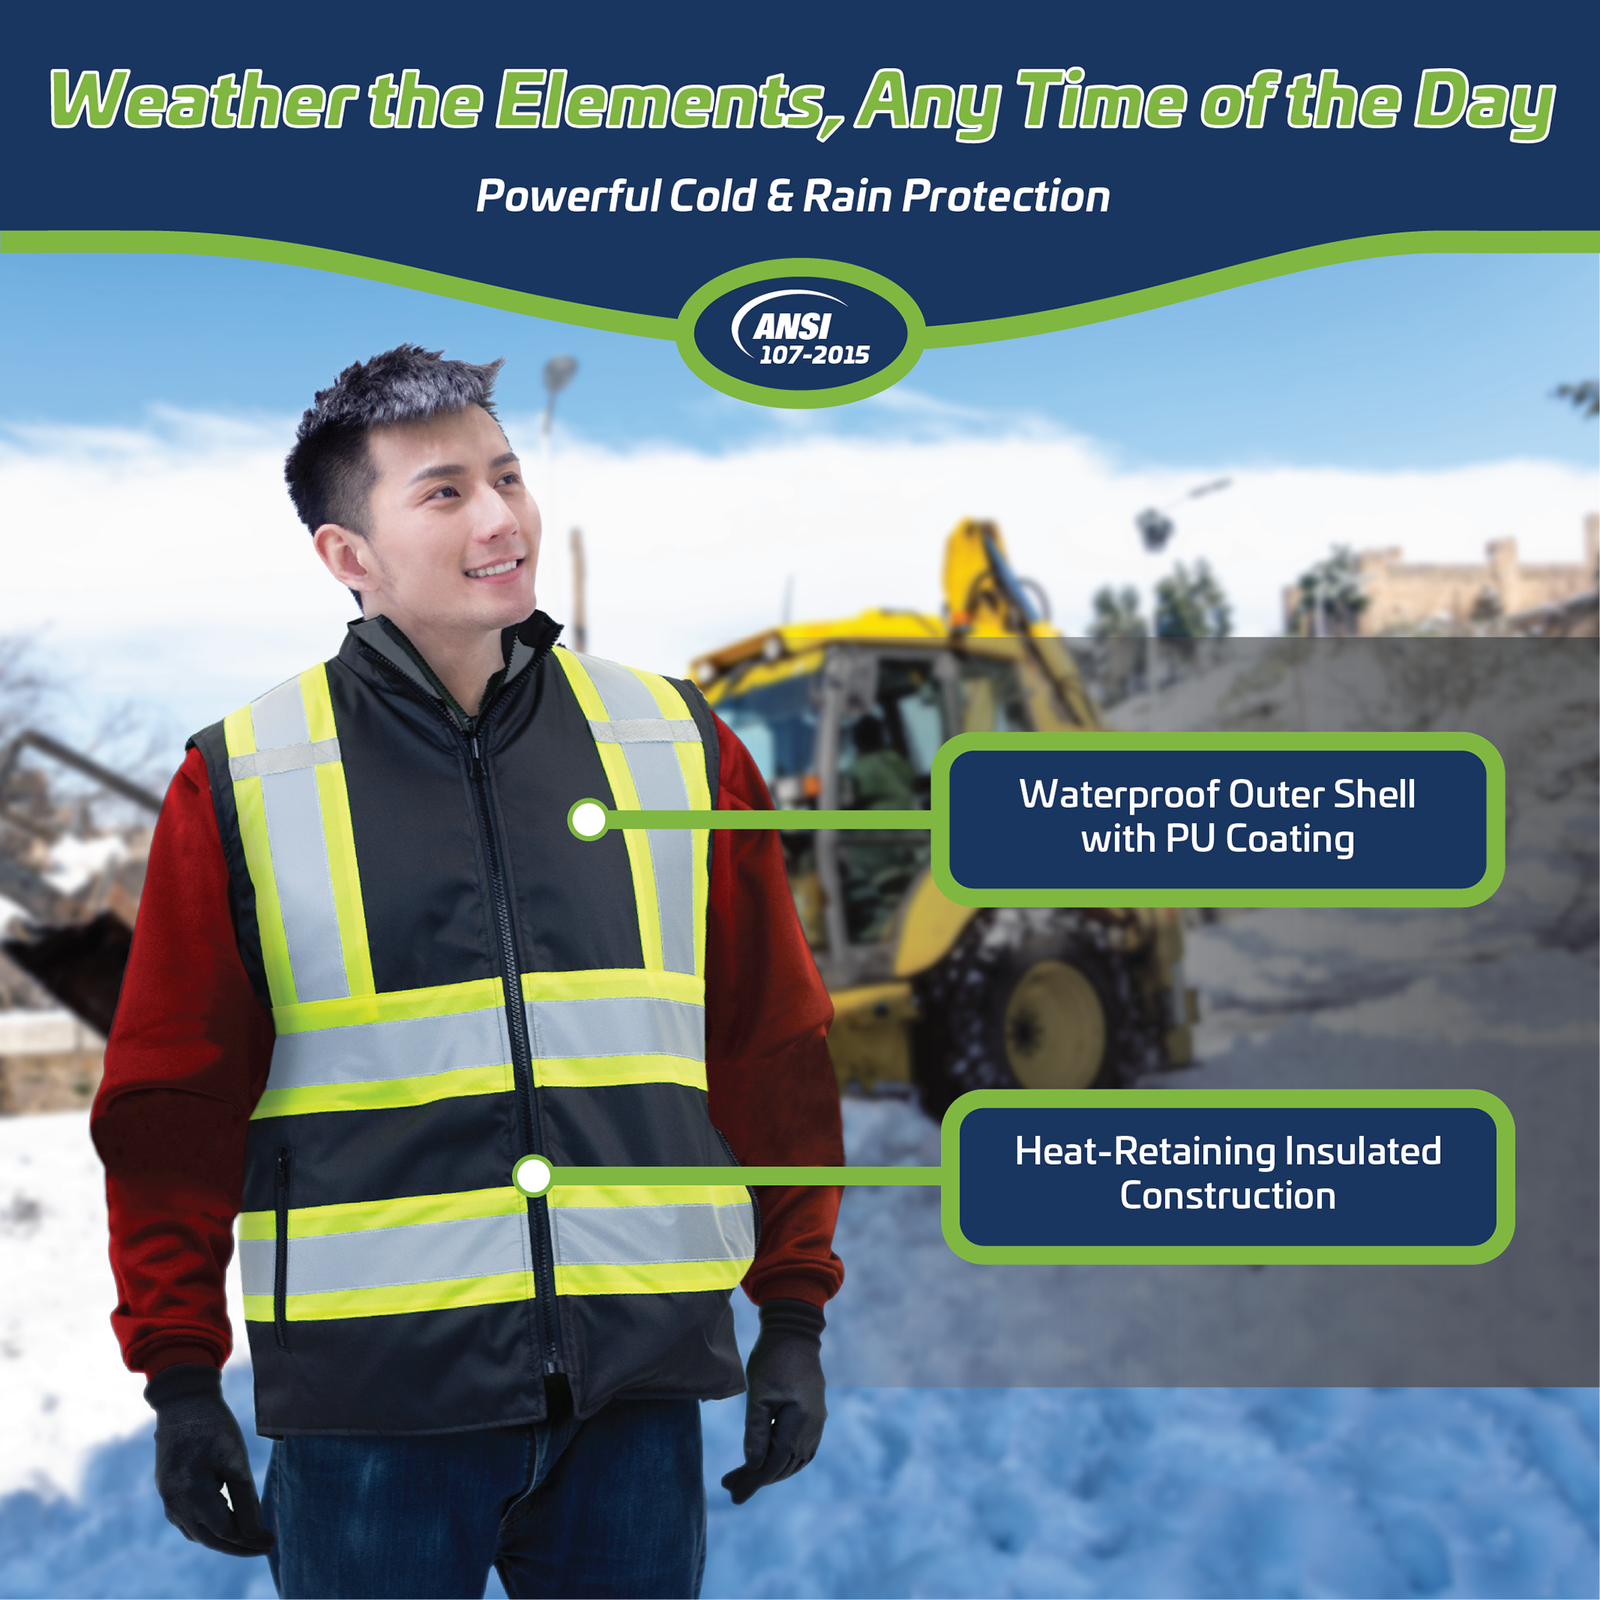 A man wearing the Black Hi-Vis reversible insulated safety vest during a road construction . Text reads, weather the elements anytime of day, powerful cold and rain protection. ANSI 107 215. PU coating. Insulated construction